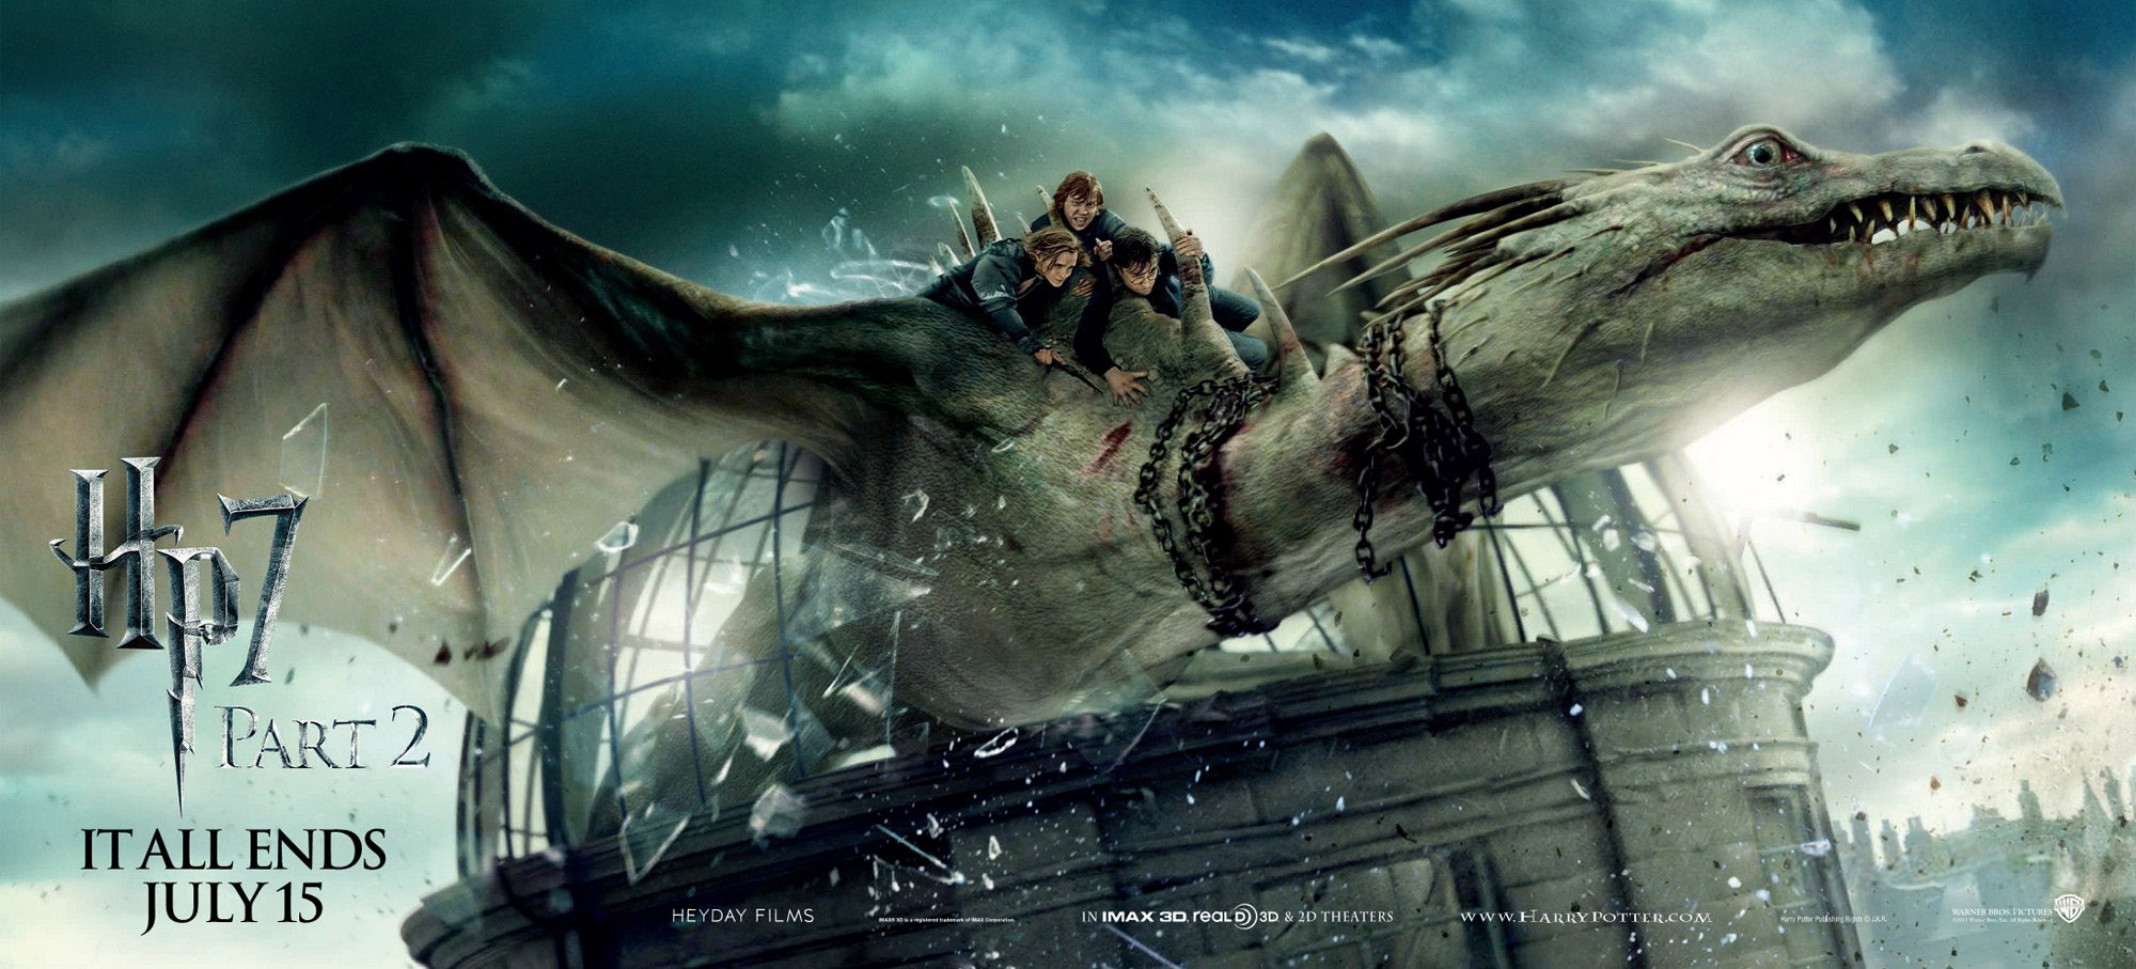 HARRY POTTER AND THE DEATHLY HALLOWS Part 2 Banner